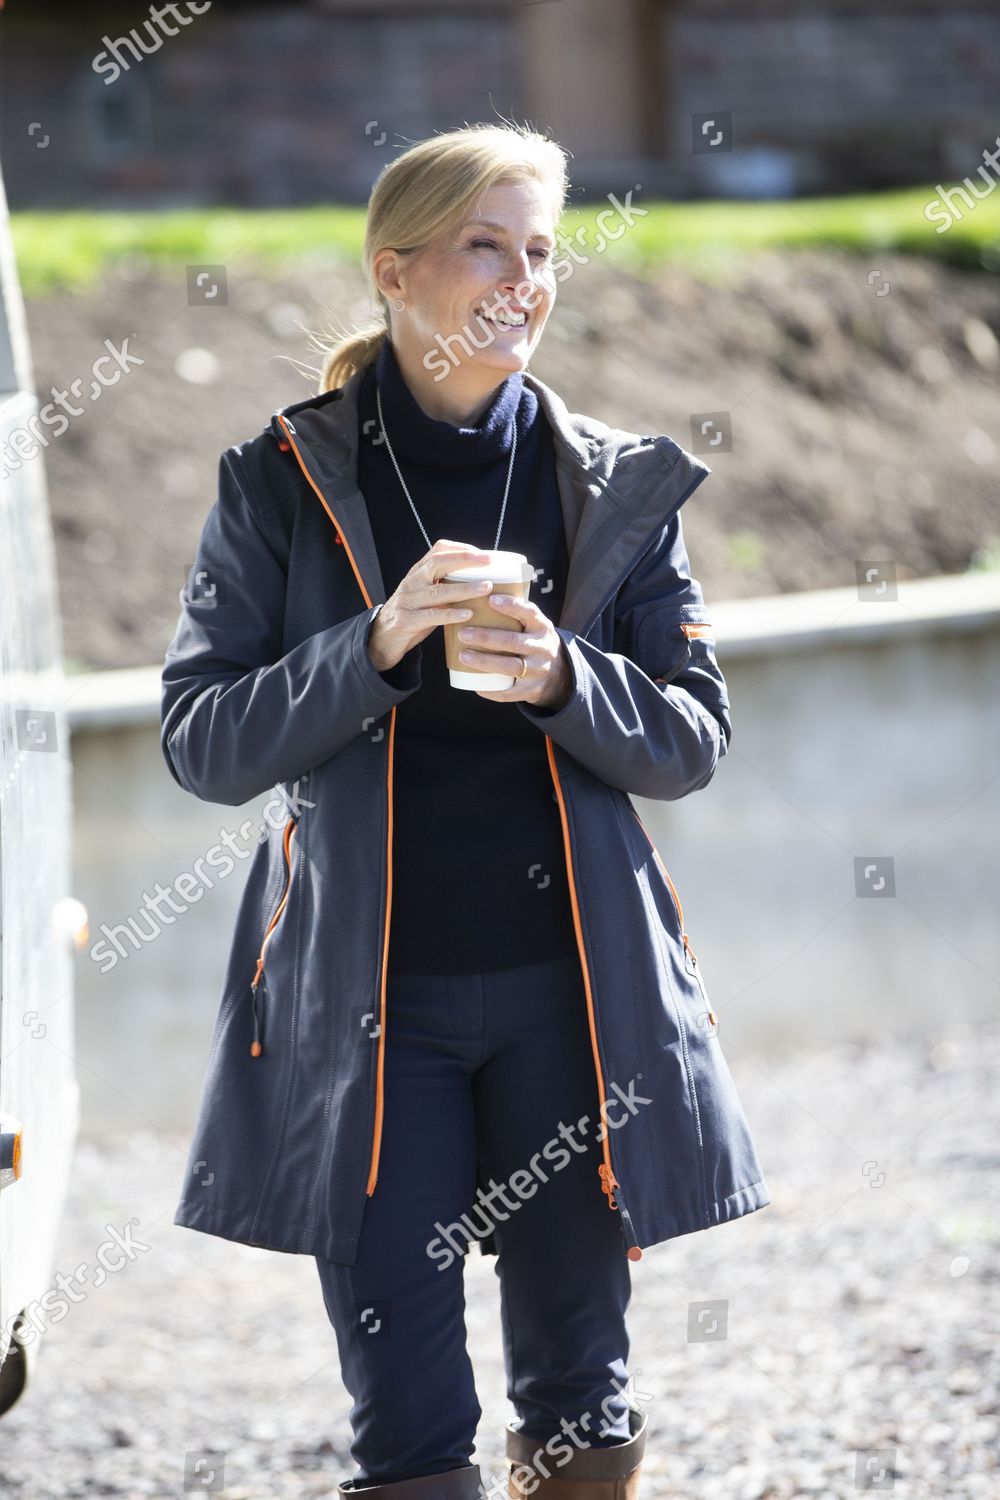 sophie-countess-of-wessex-visit-to-coverwood-farm-surrey-uk-shutterstock-editorial-10787745al.jpg